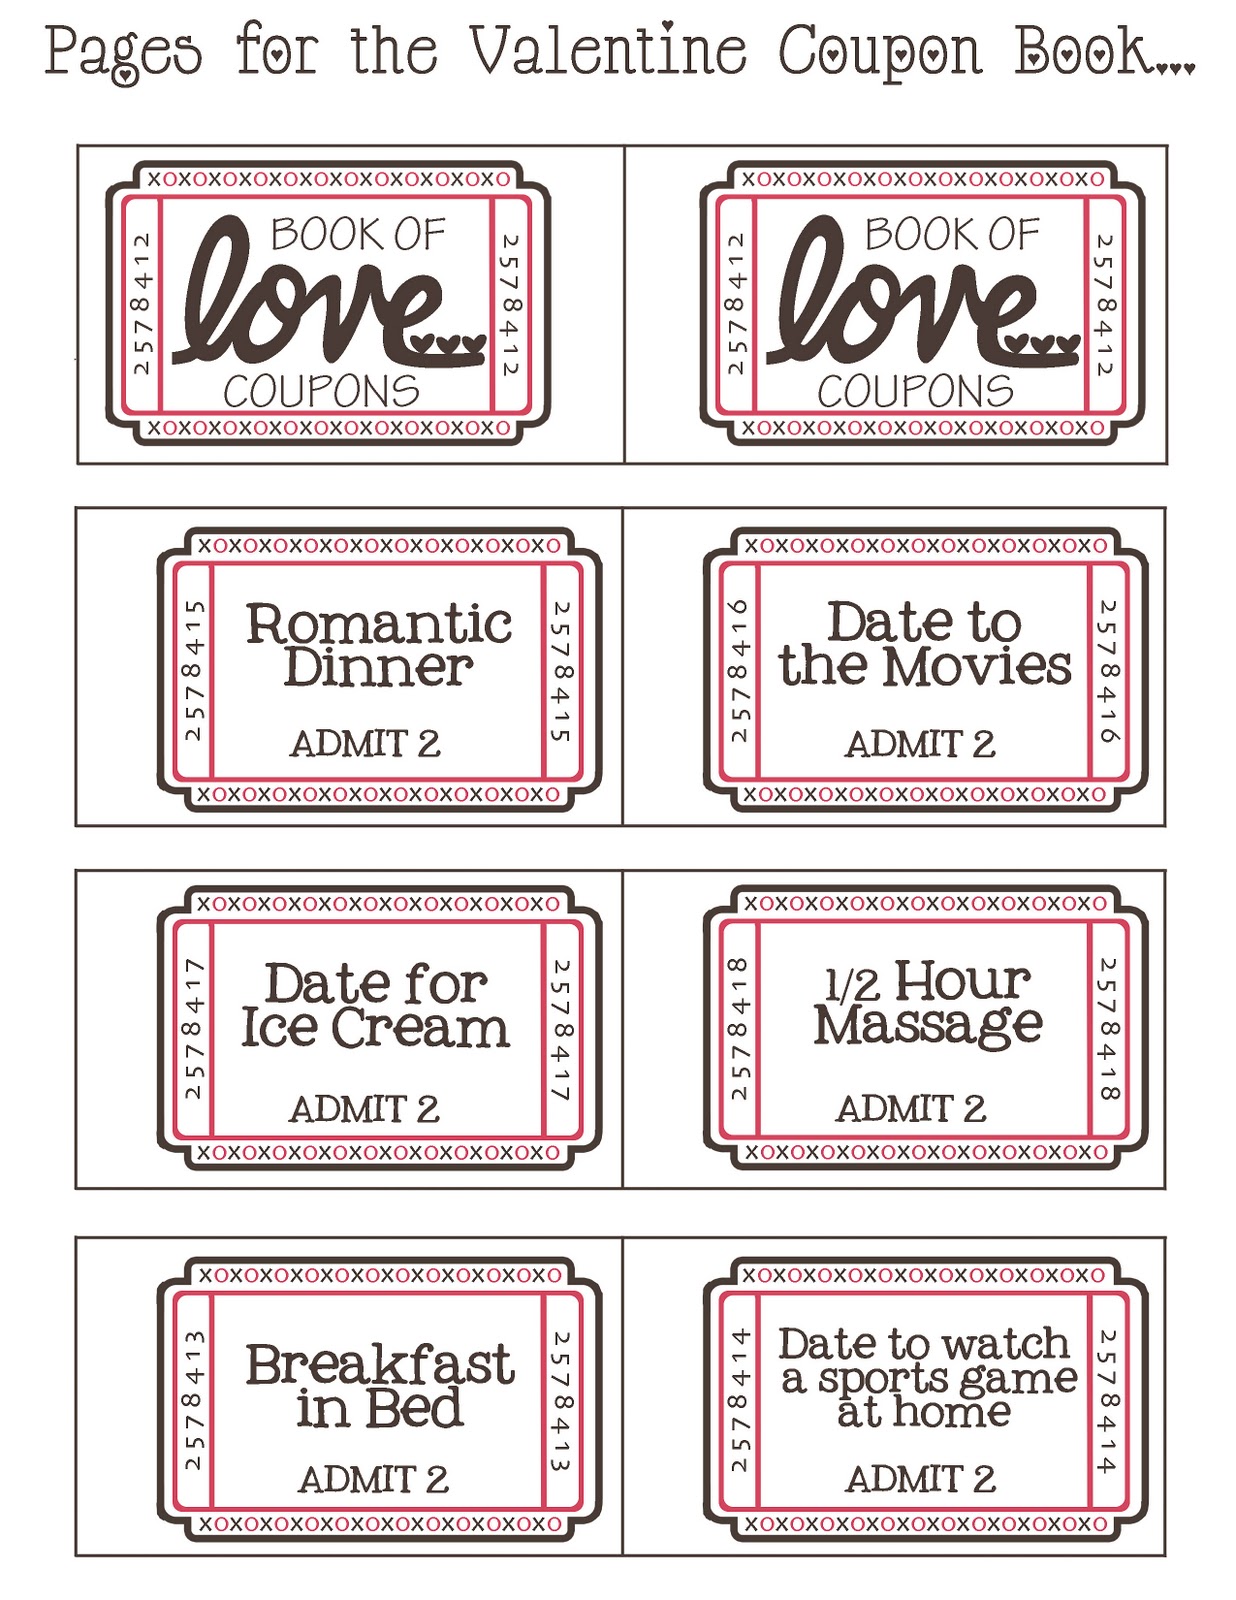 Mommy By Day Crafter By Night Free Printable Valentine Coupon Book